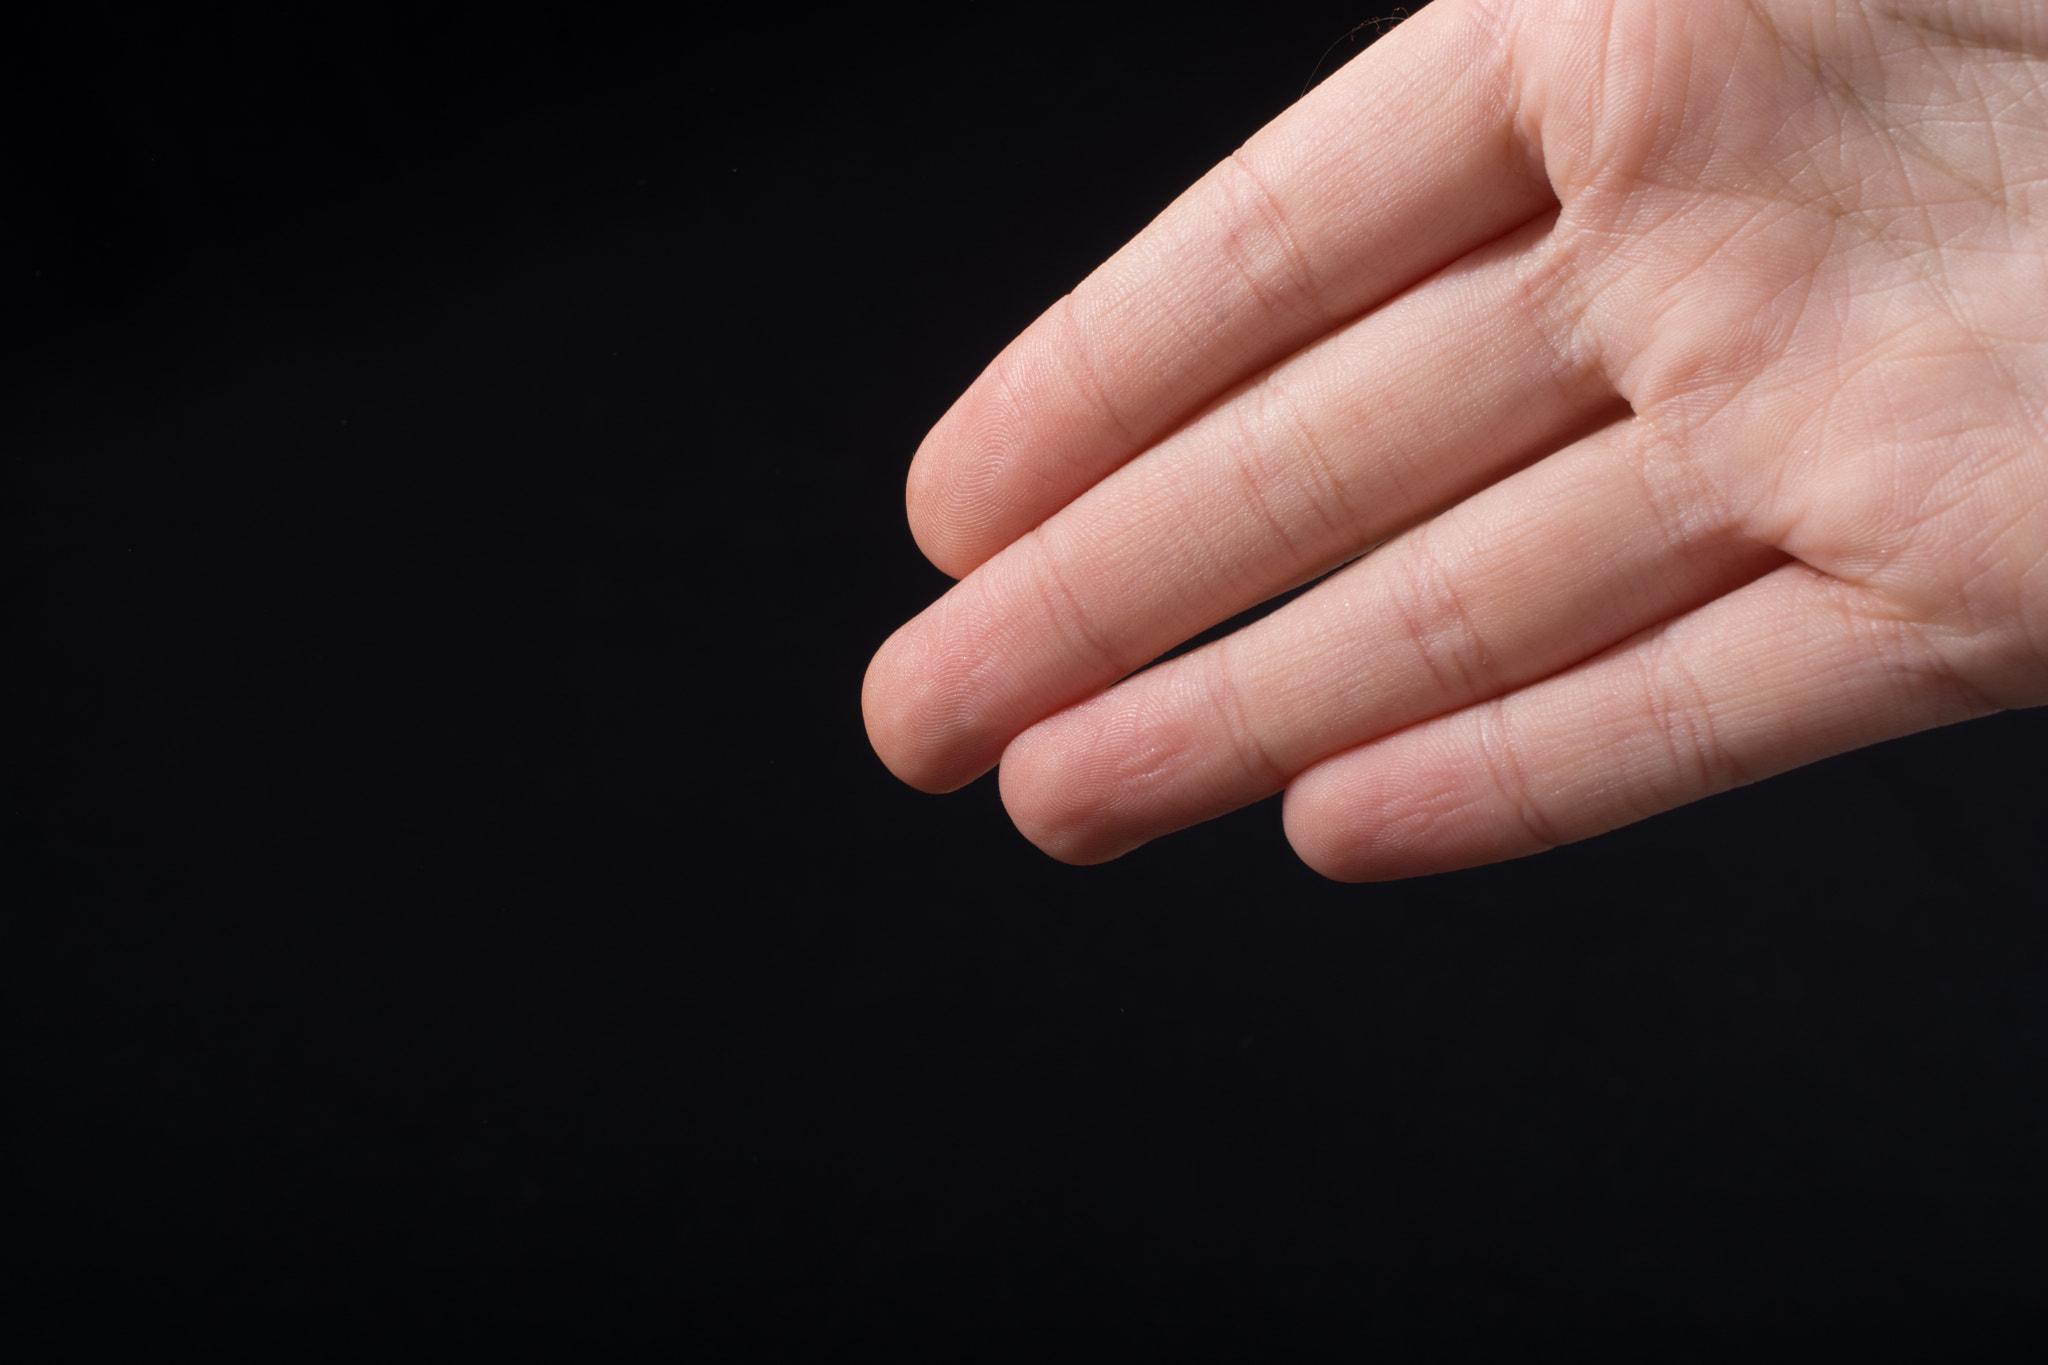 Four fingers of a human hand partly seen in view